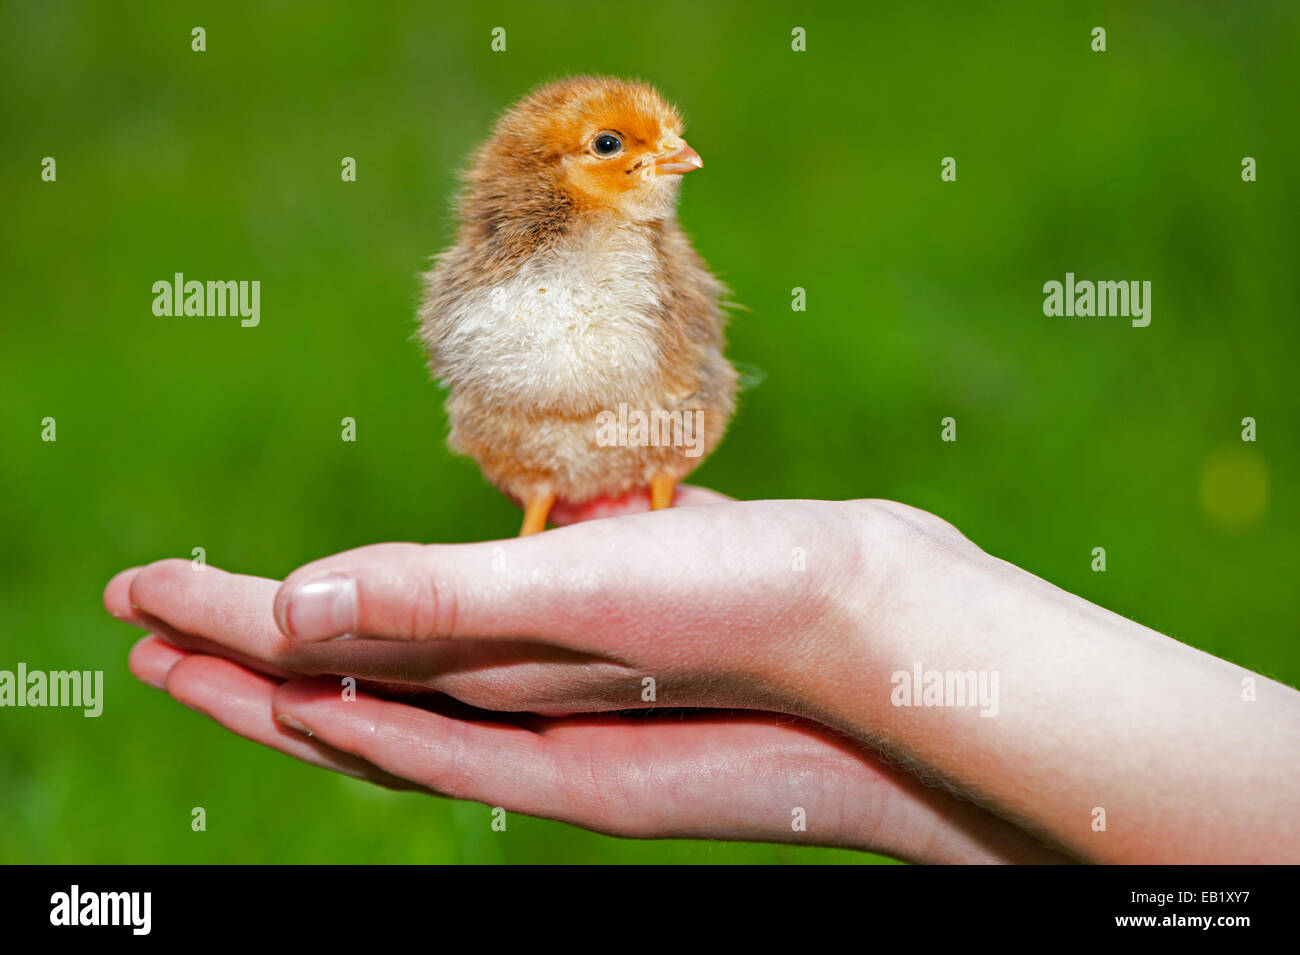 Day old poultry chick being held in a childs hand. Stock Photo